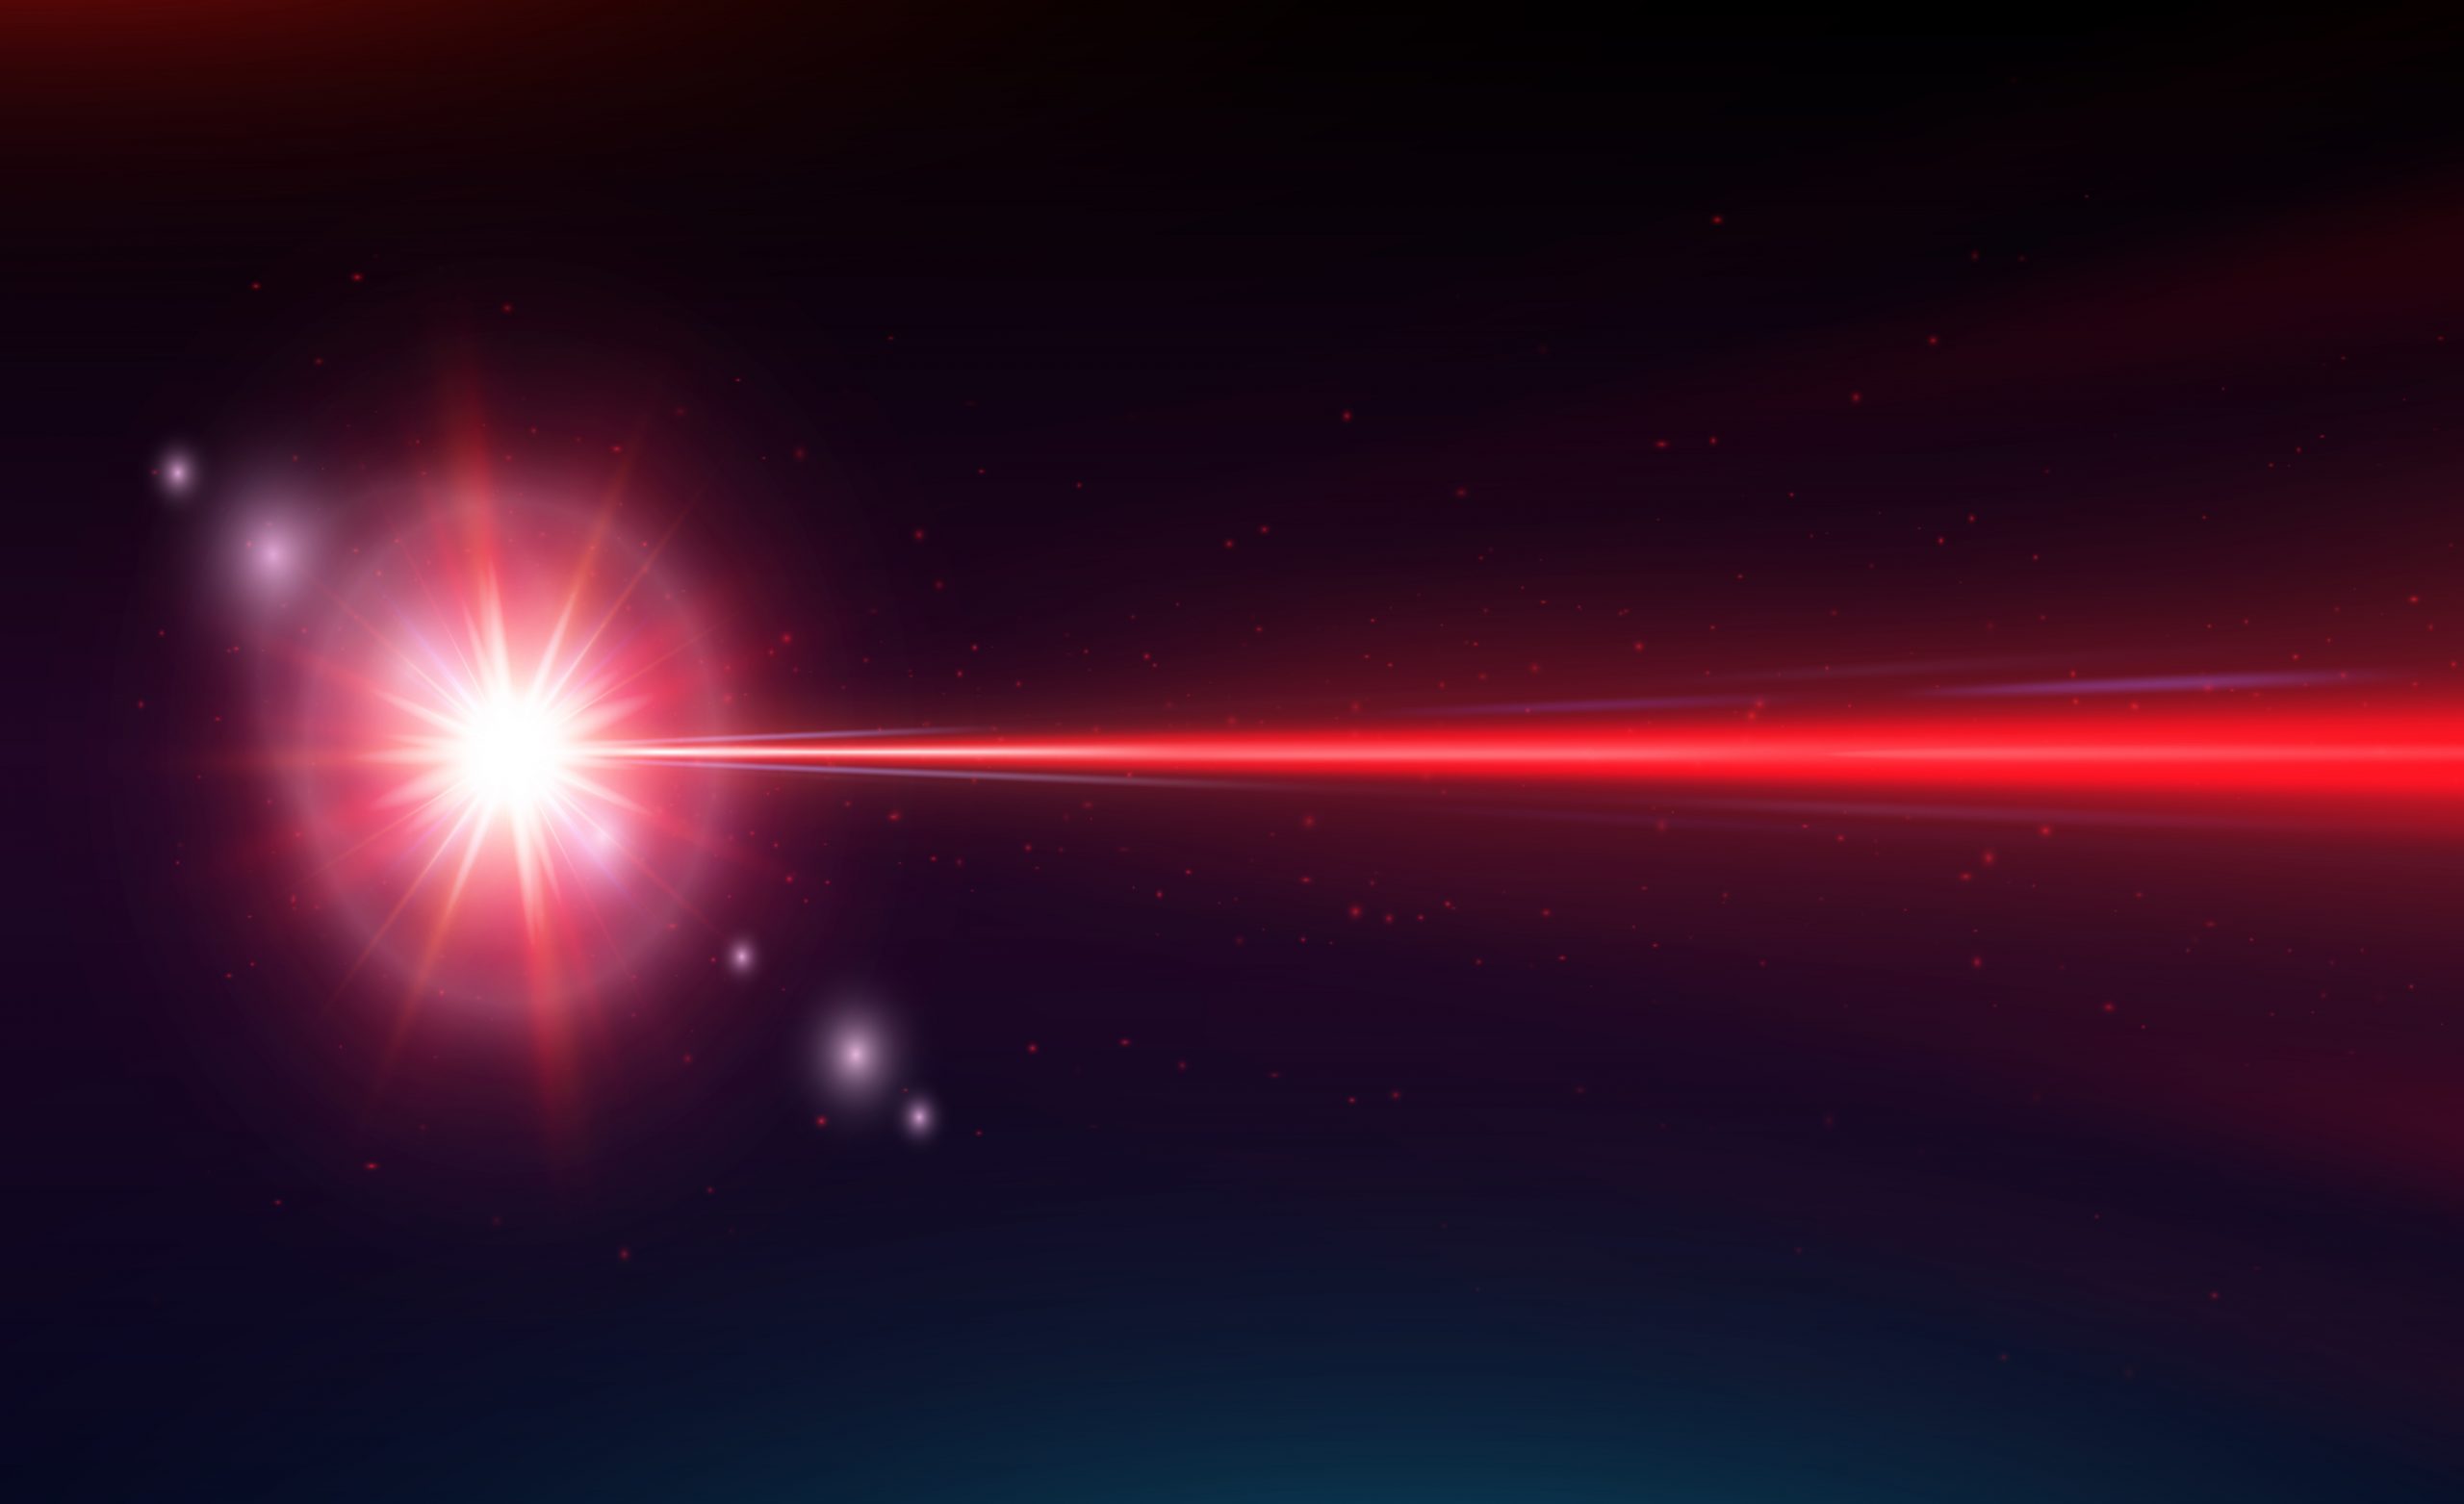 An illustration of a laser beam in outer space. Depositphotos.